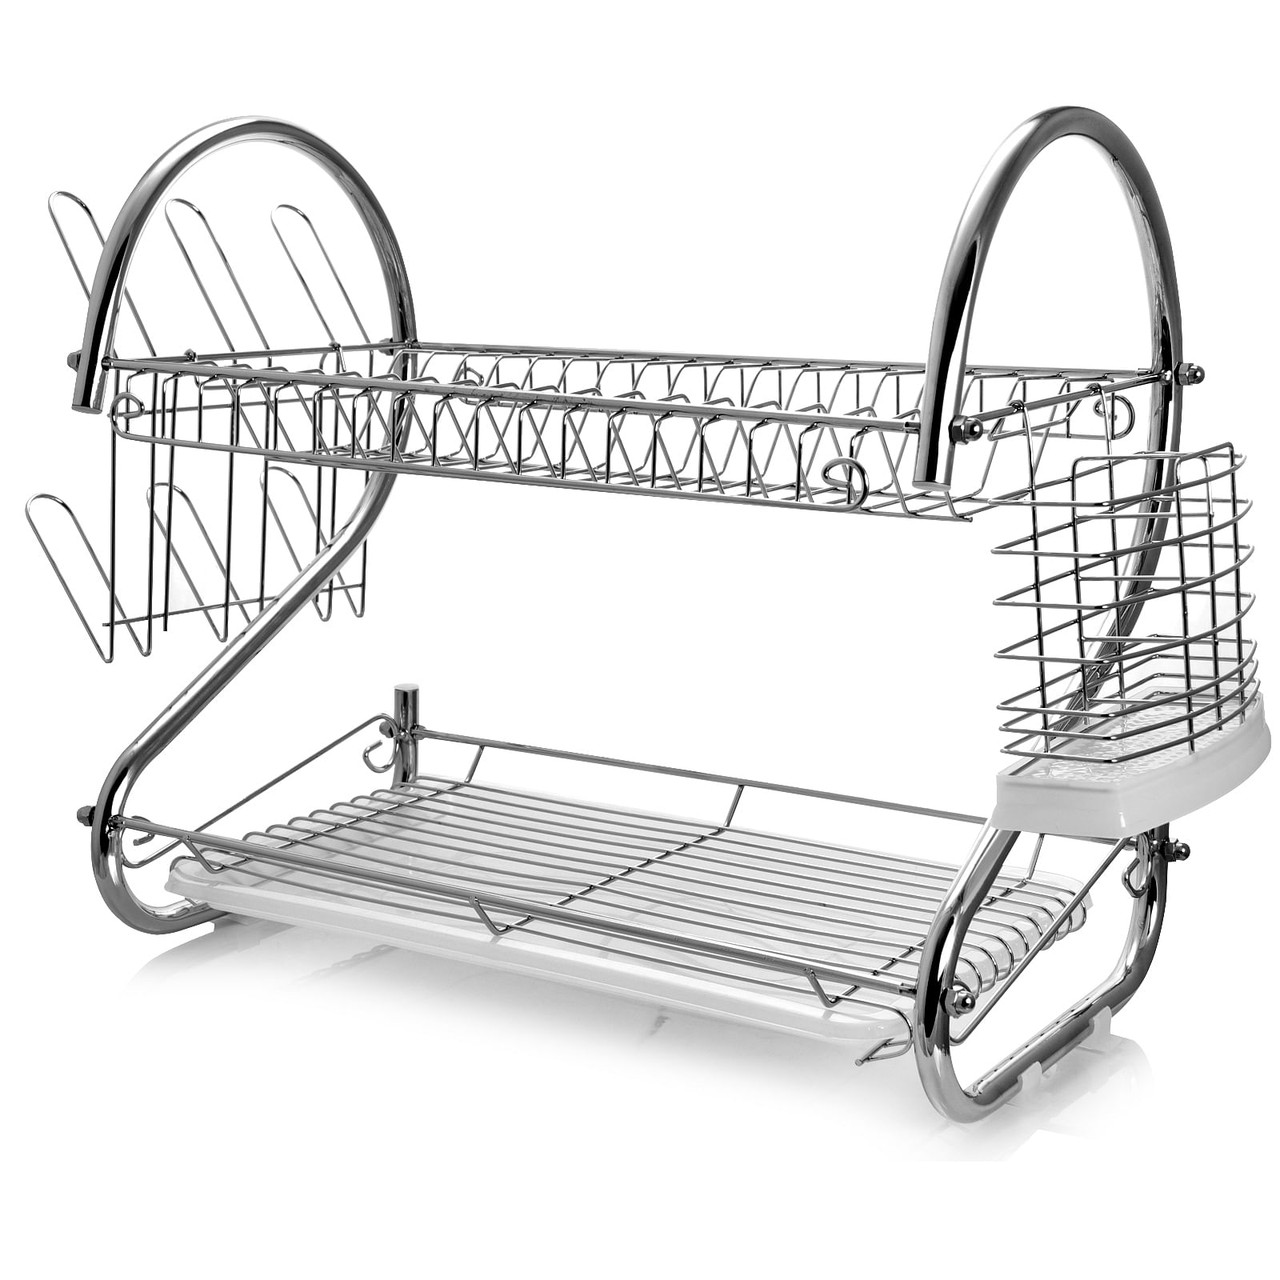 MegaChef 16 Inch Two Shelf Dish Rack with Easily Removable Draining Tray, 6 Cup Hangers and Removab